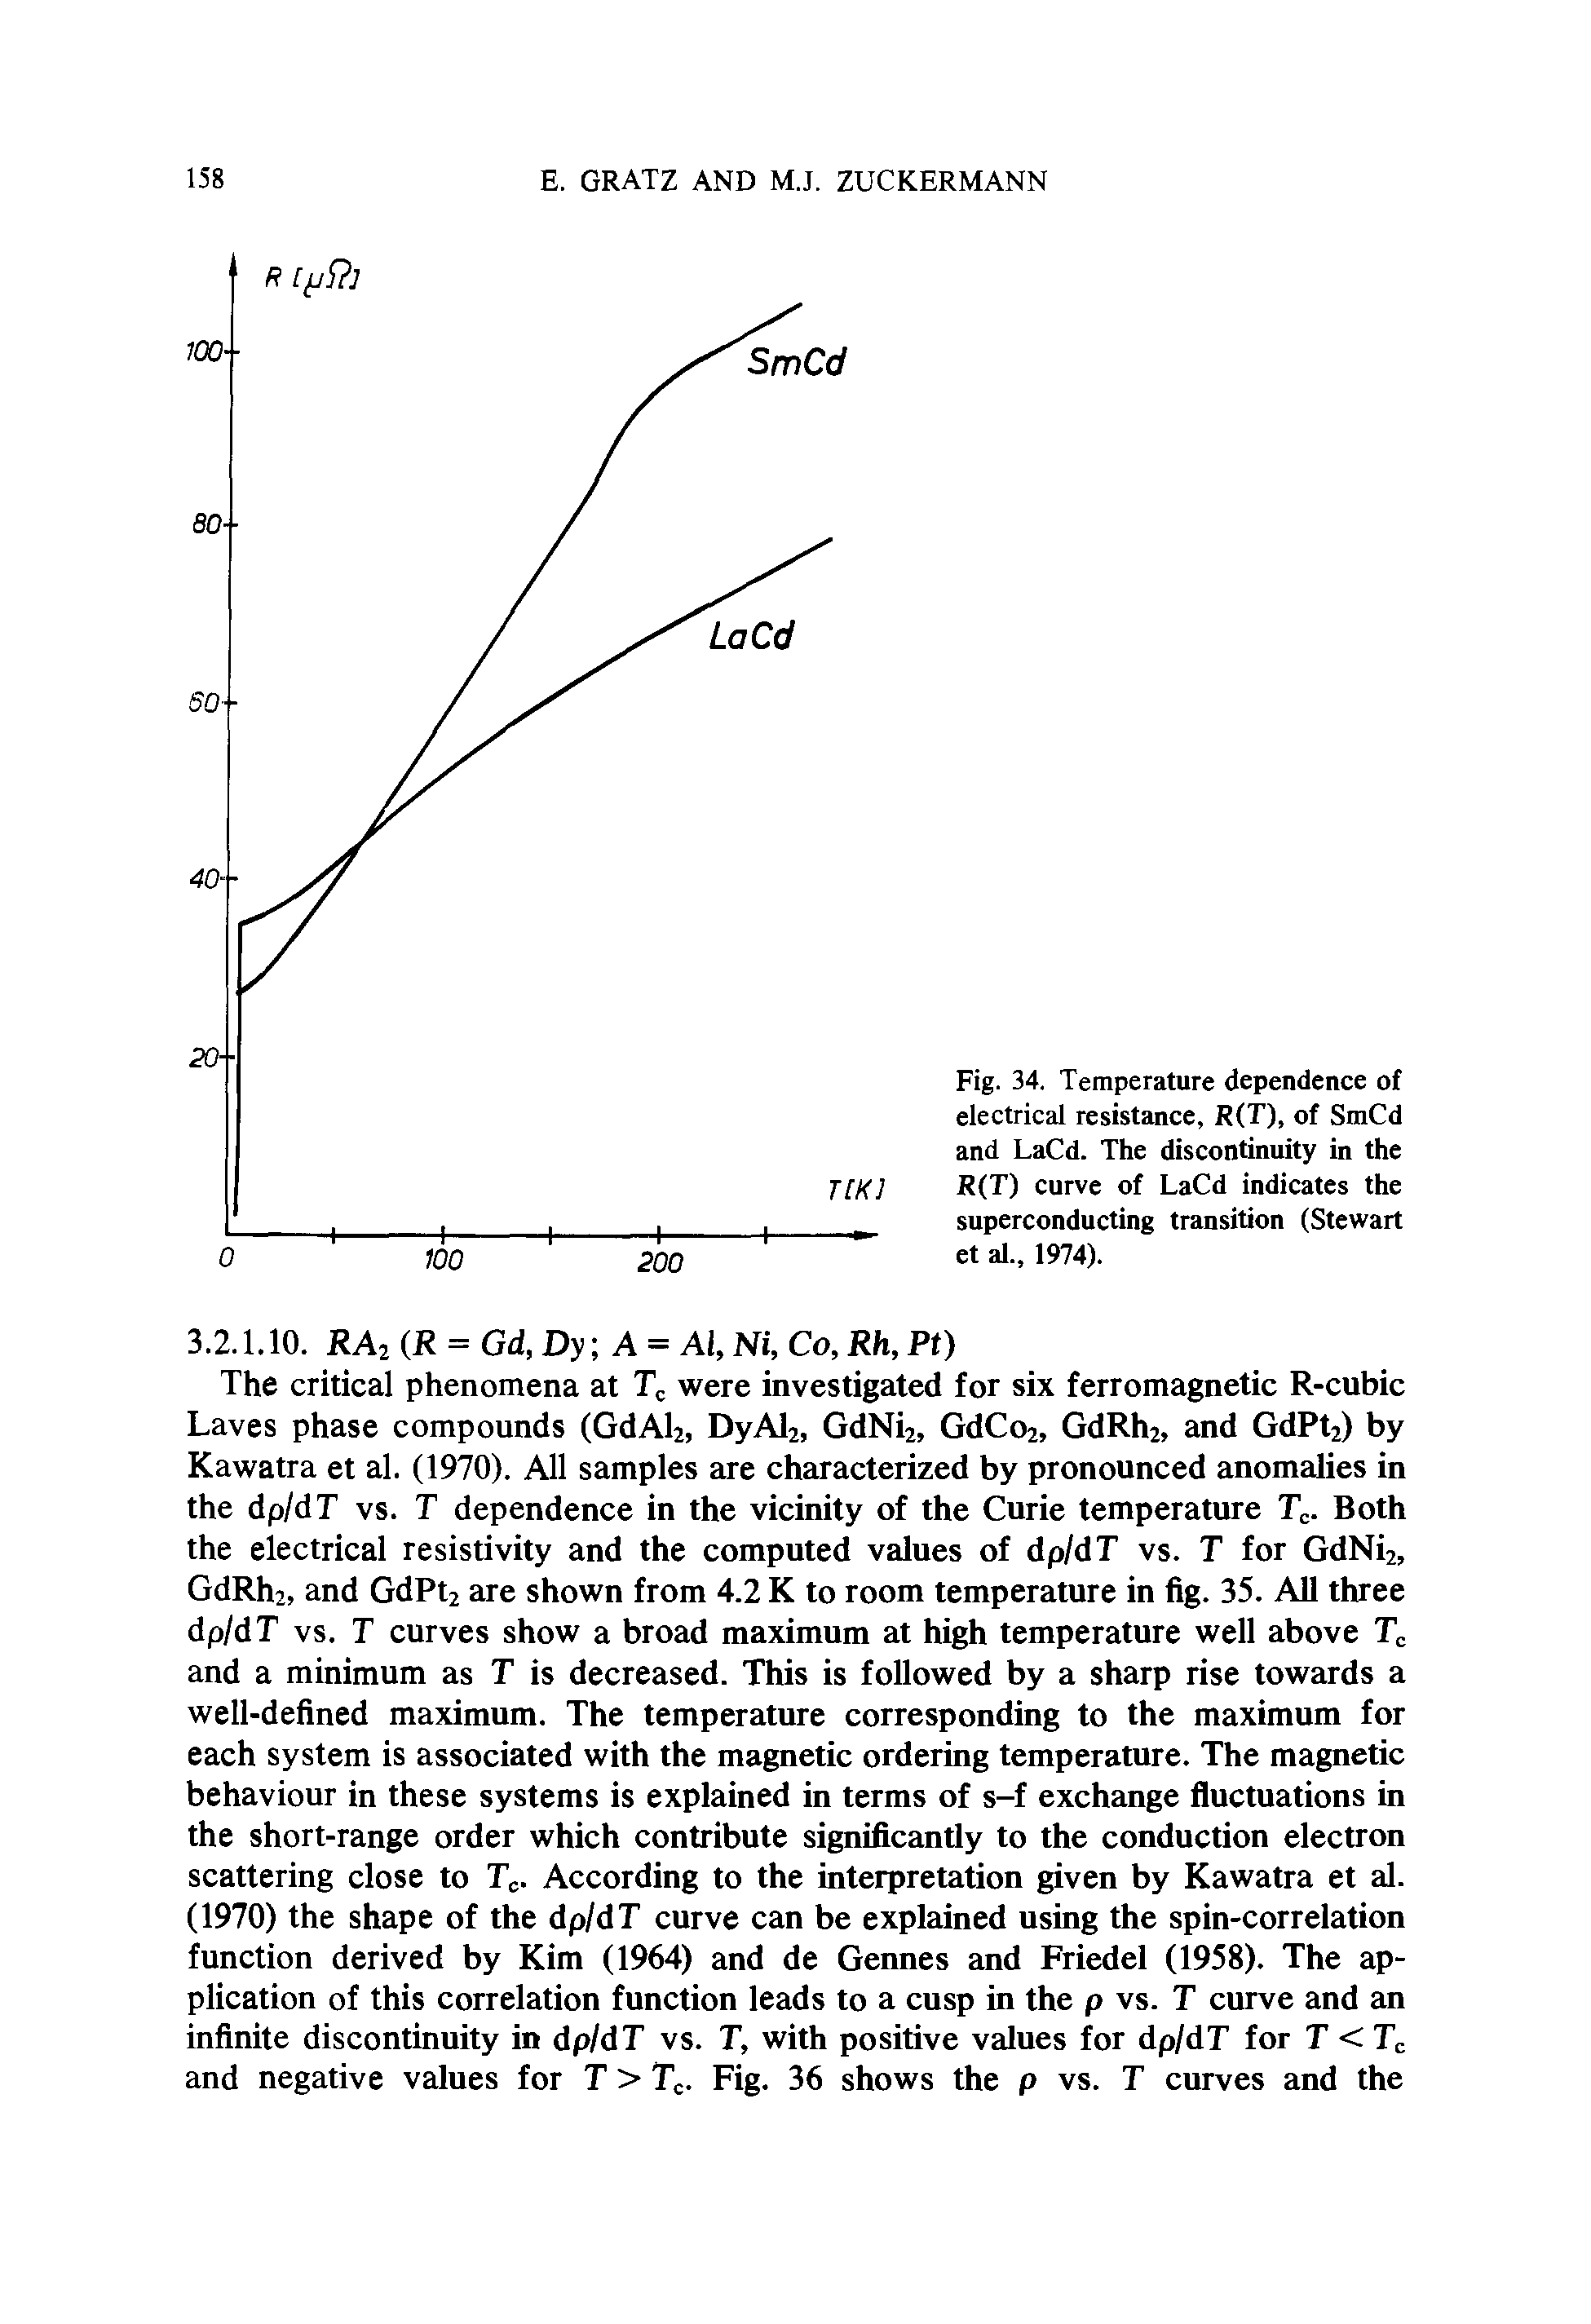 Fig. 34. Temperature dependence of electrical resistance, R(T), of SmCd and LaCd. The discontinuity in the R(T) curve of LaCd indicates the superconducting transition (Stewart et al., 1974).